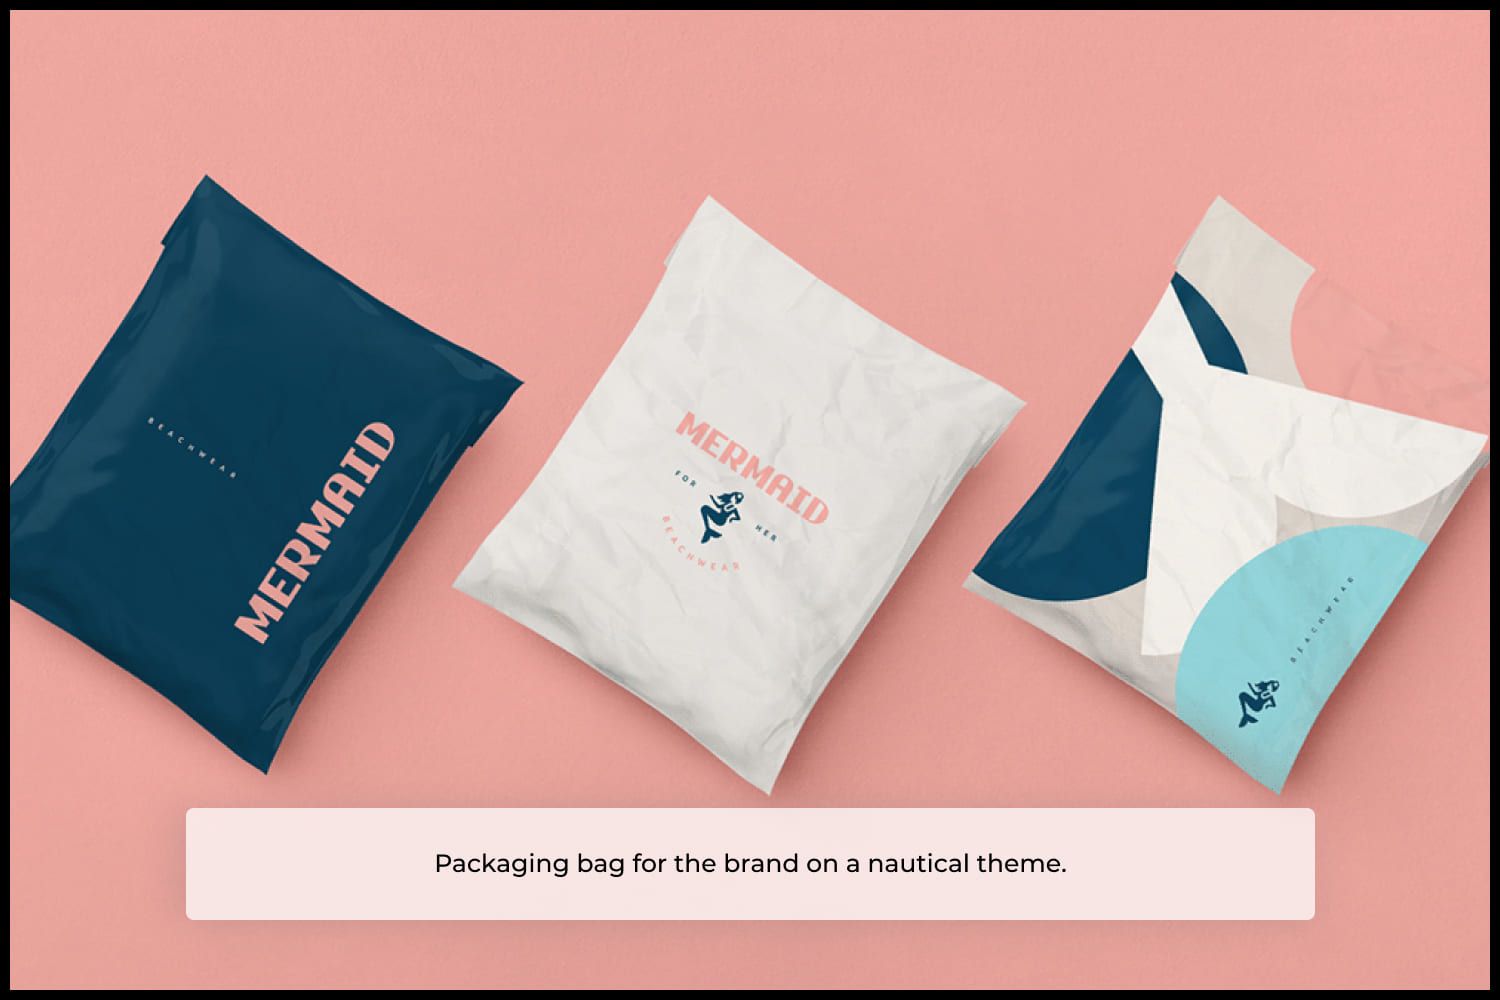 Packaging bags for the brand on a nautical theme.